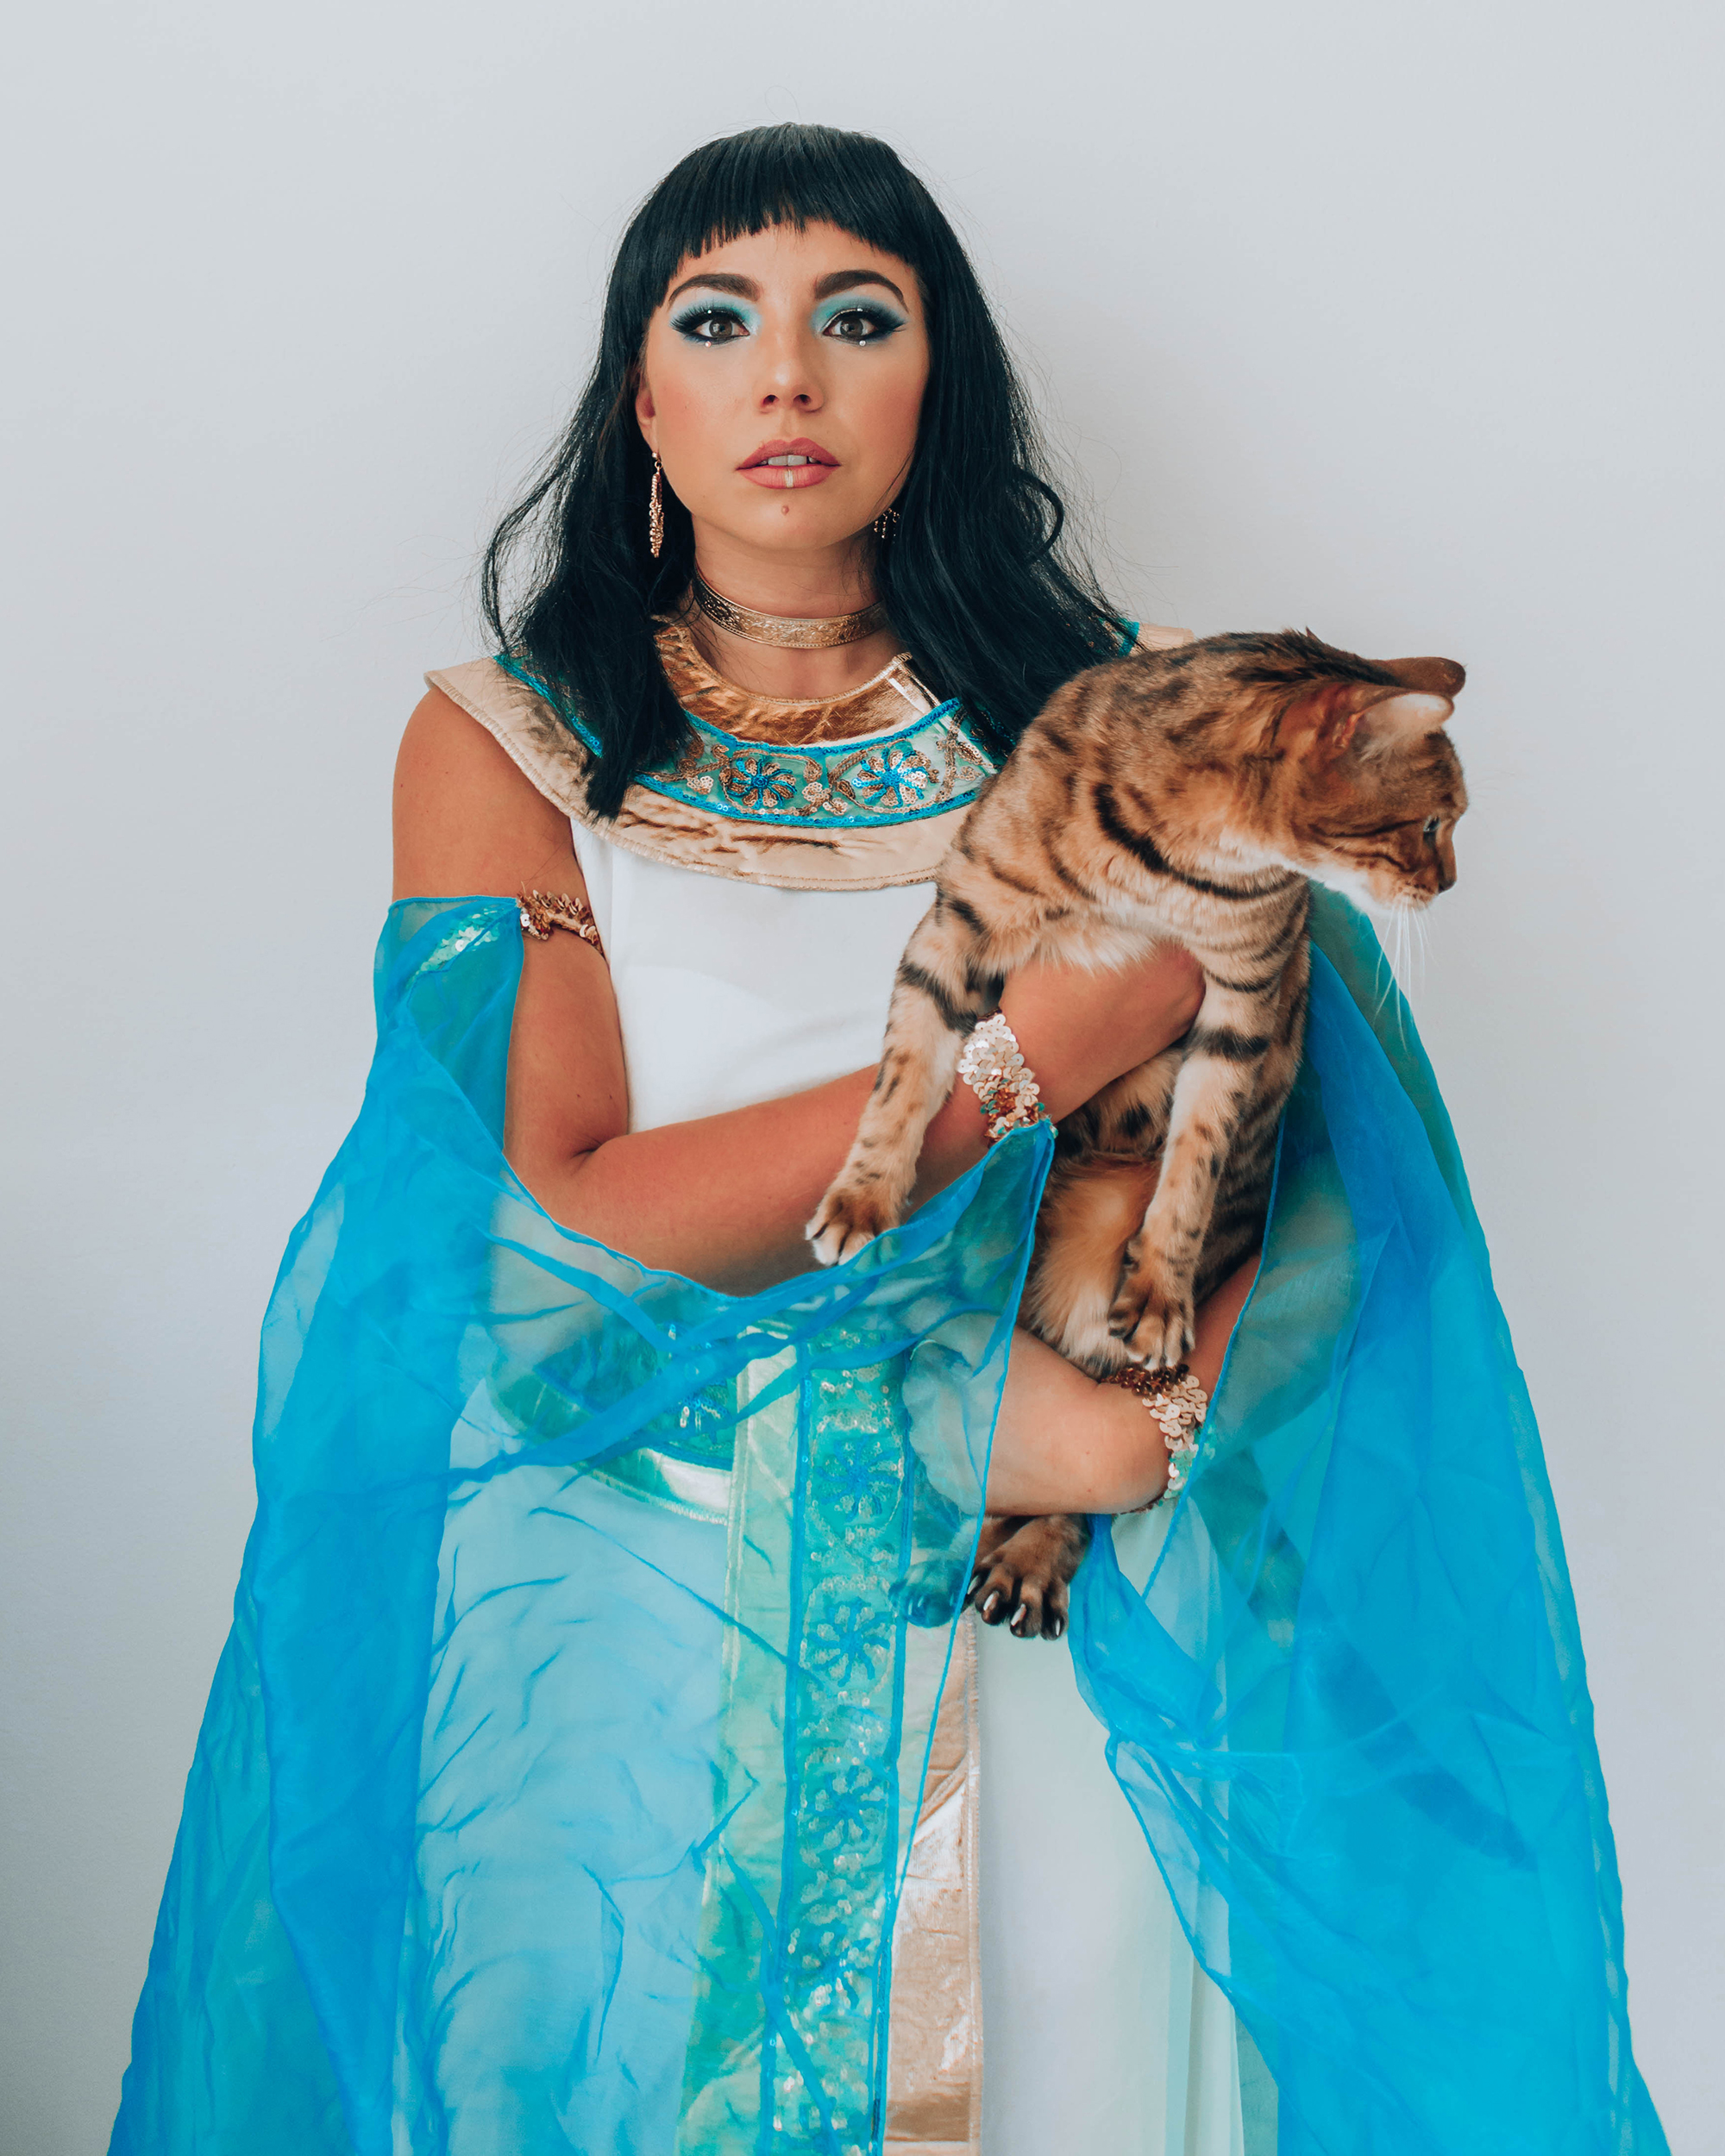 Lauryn Lasko Hock dressed up as Queen Cleopatra  to honor her as a female role model